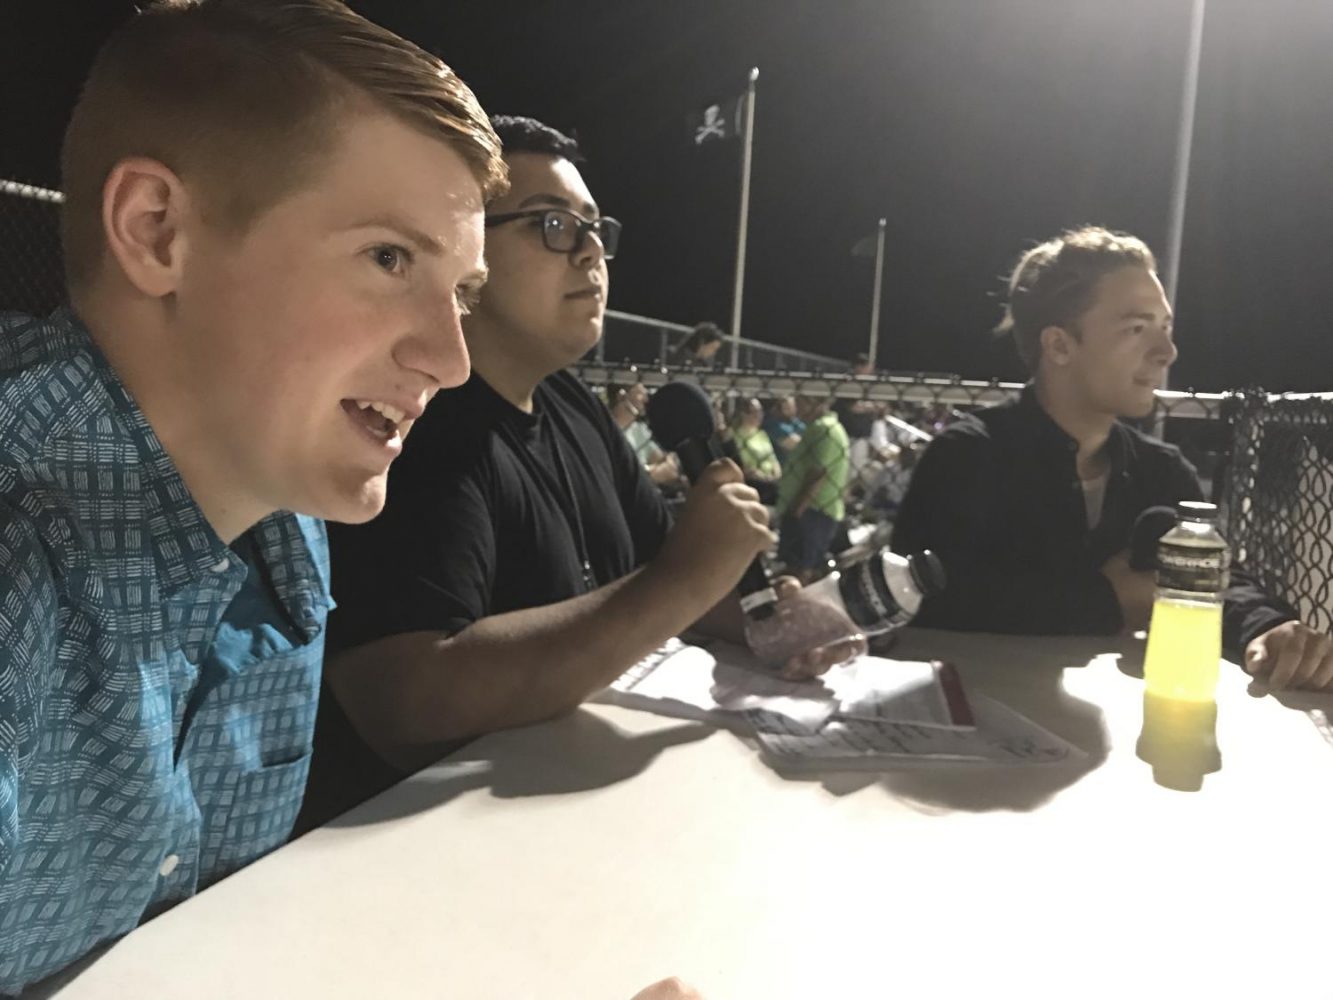 Students live stream football games